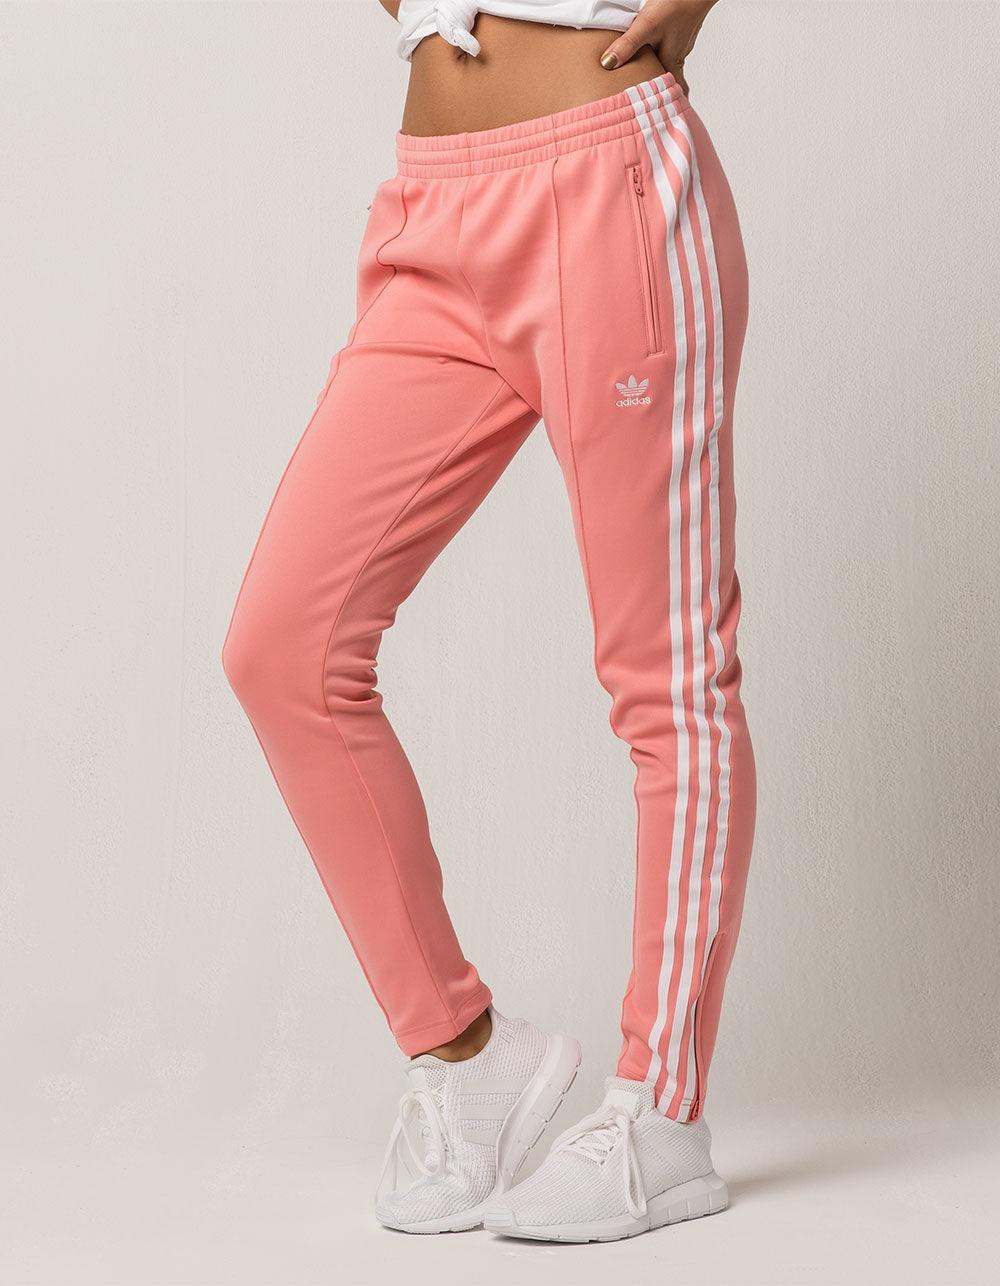 adidas all pink shoes